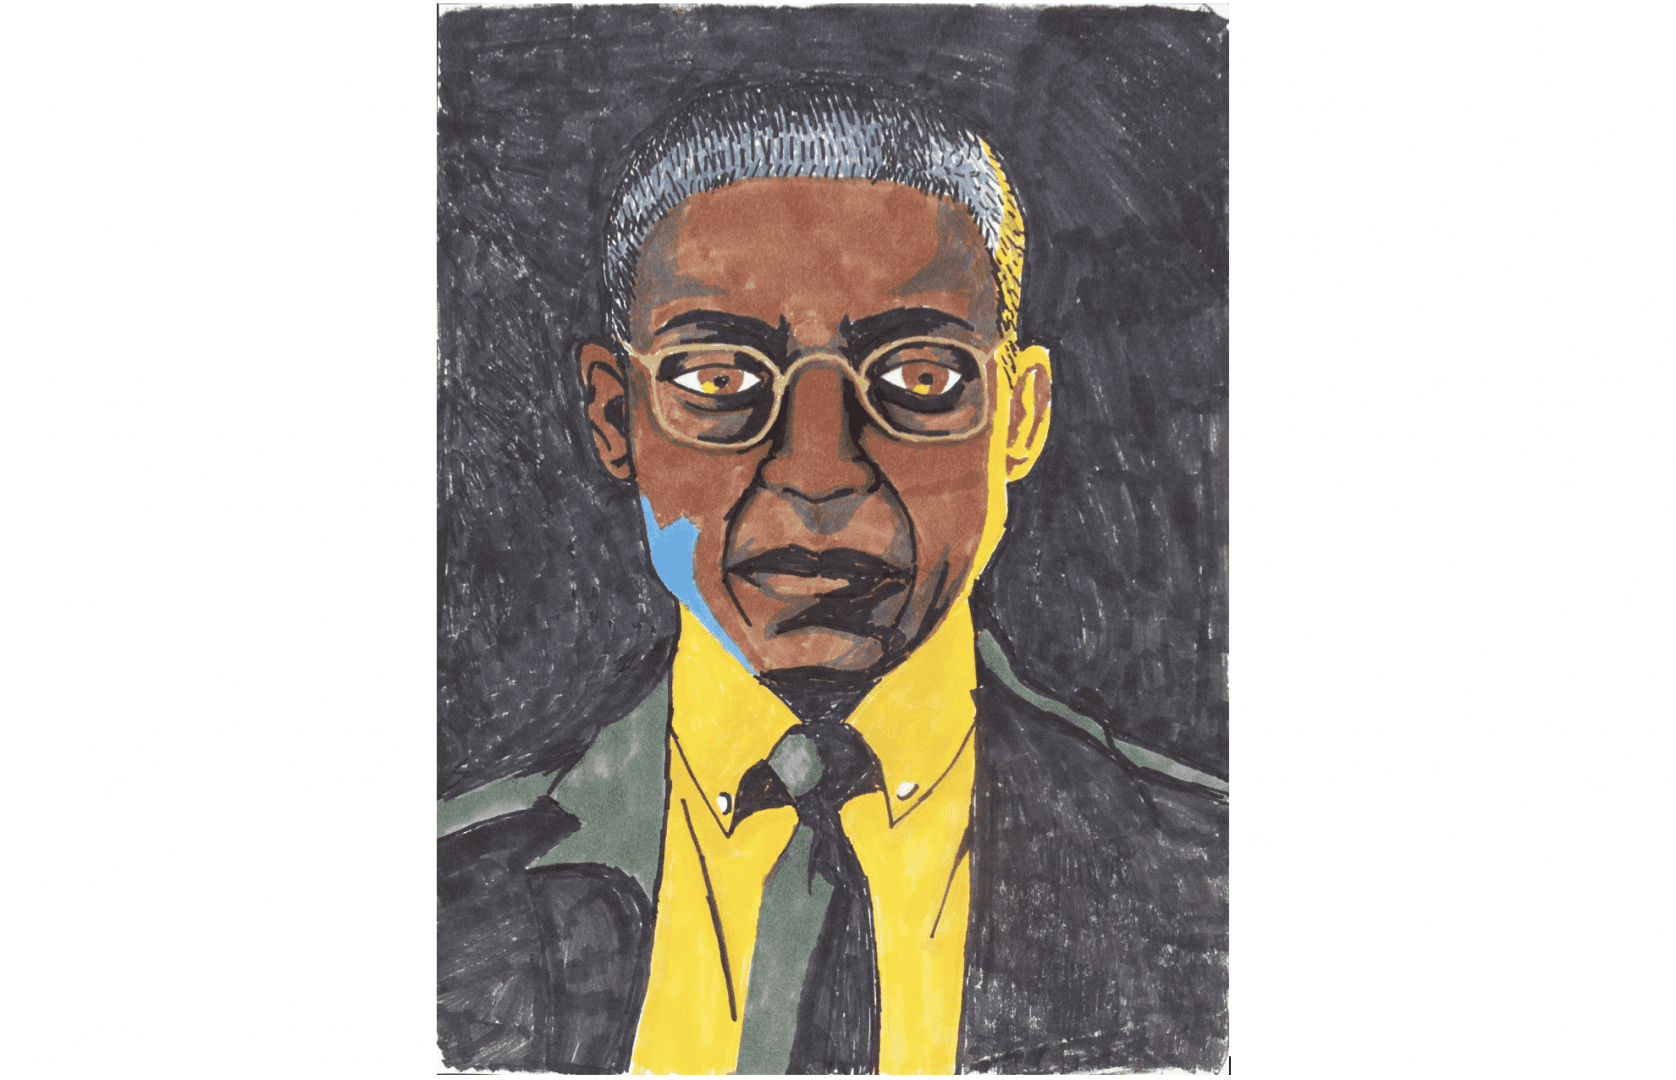 portrait of a person with medium brown skin, short gray or shiny hair, eyeglasses, and wearing a coat and tie